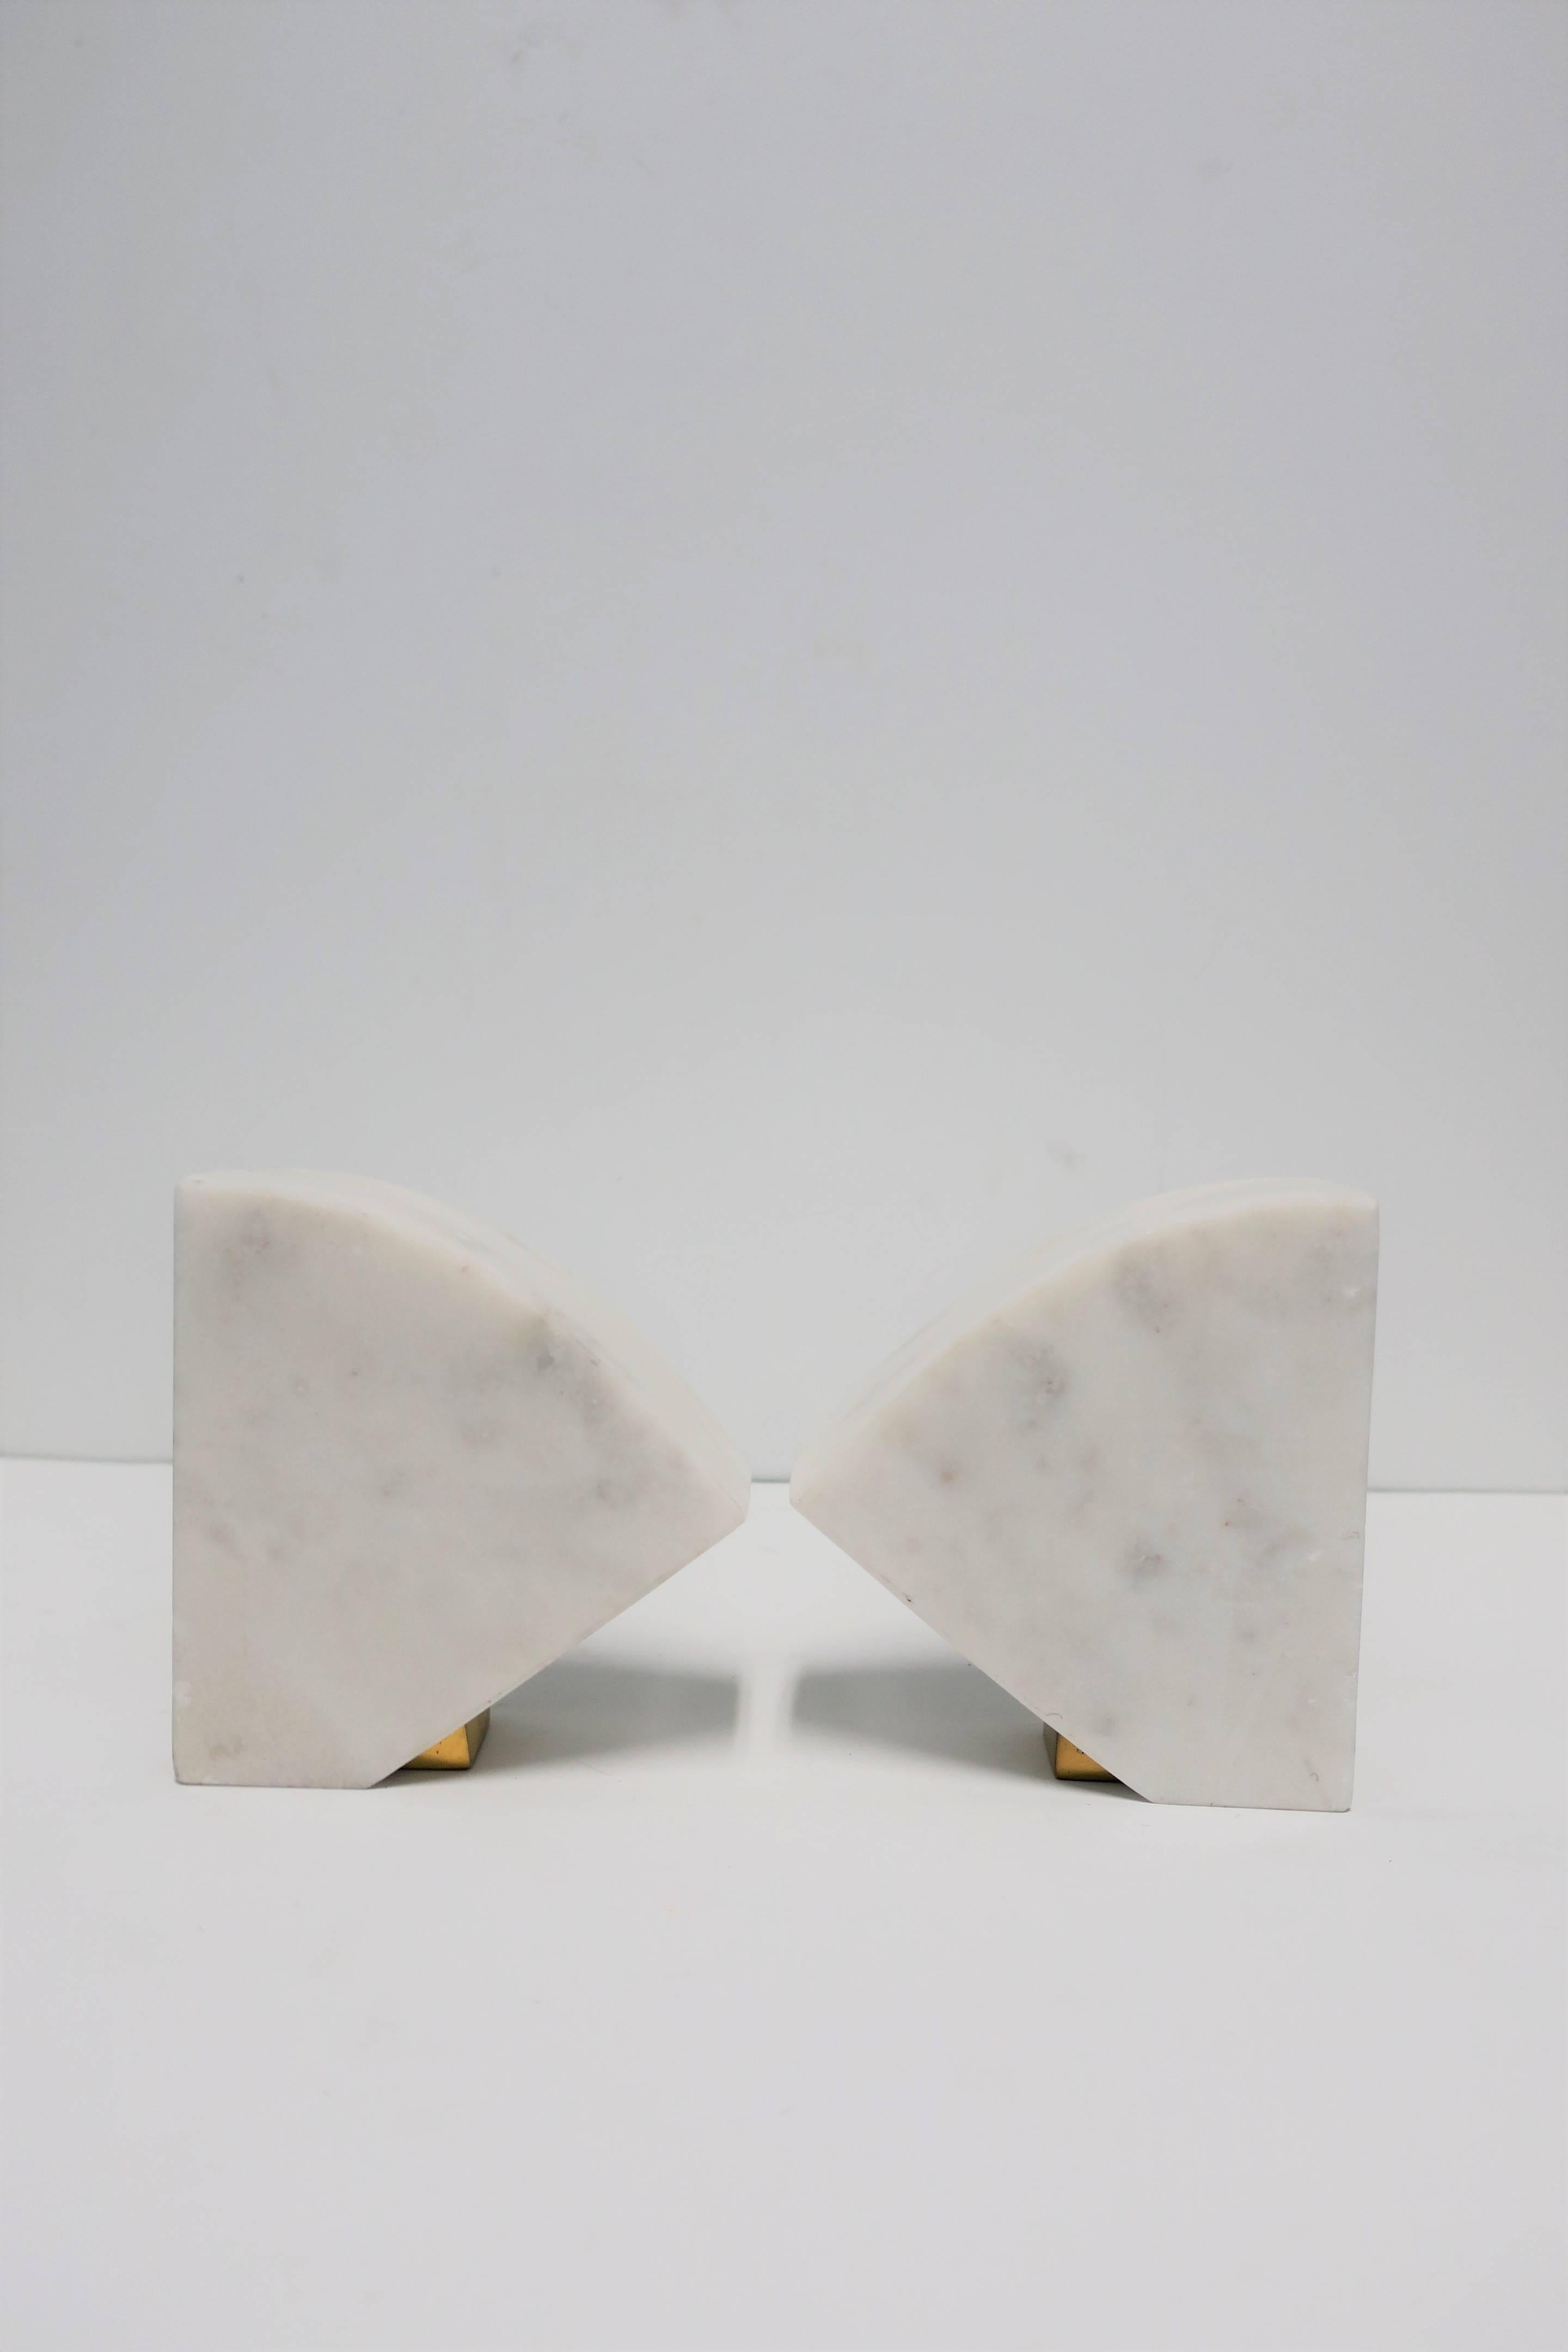 White and Gold Marble Bookends or Decorative Object Sculpture 1